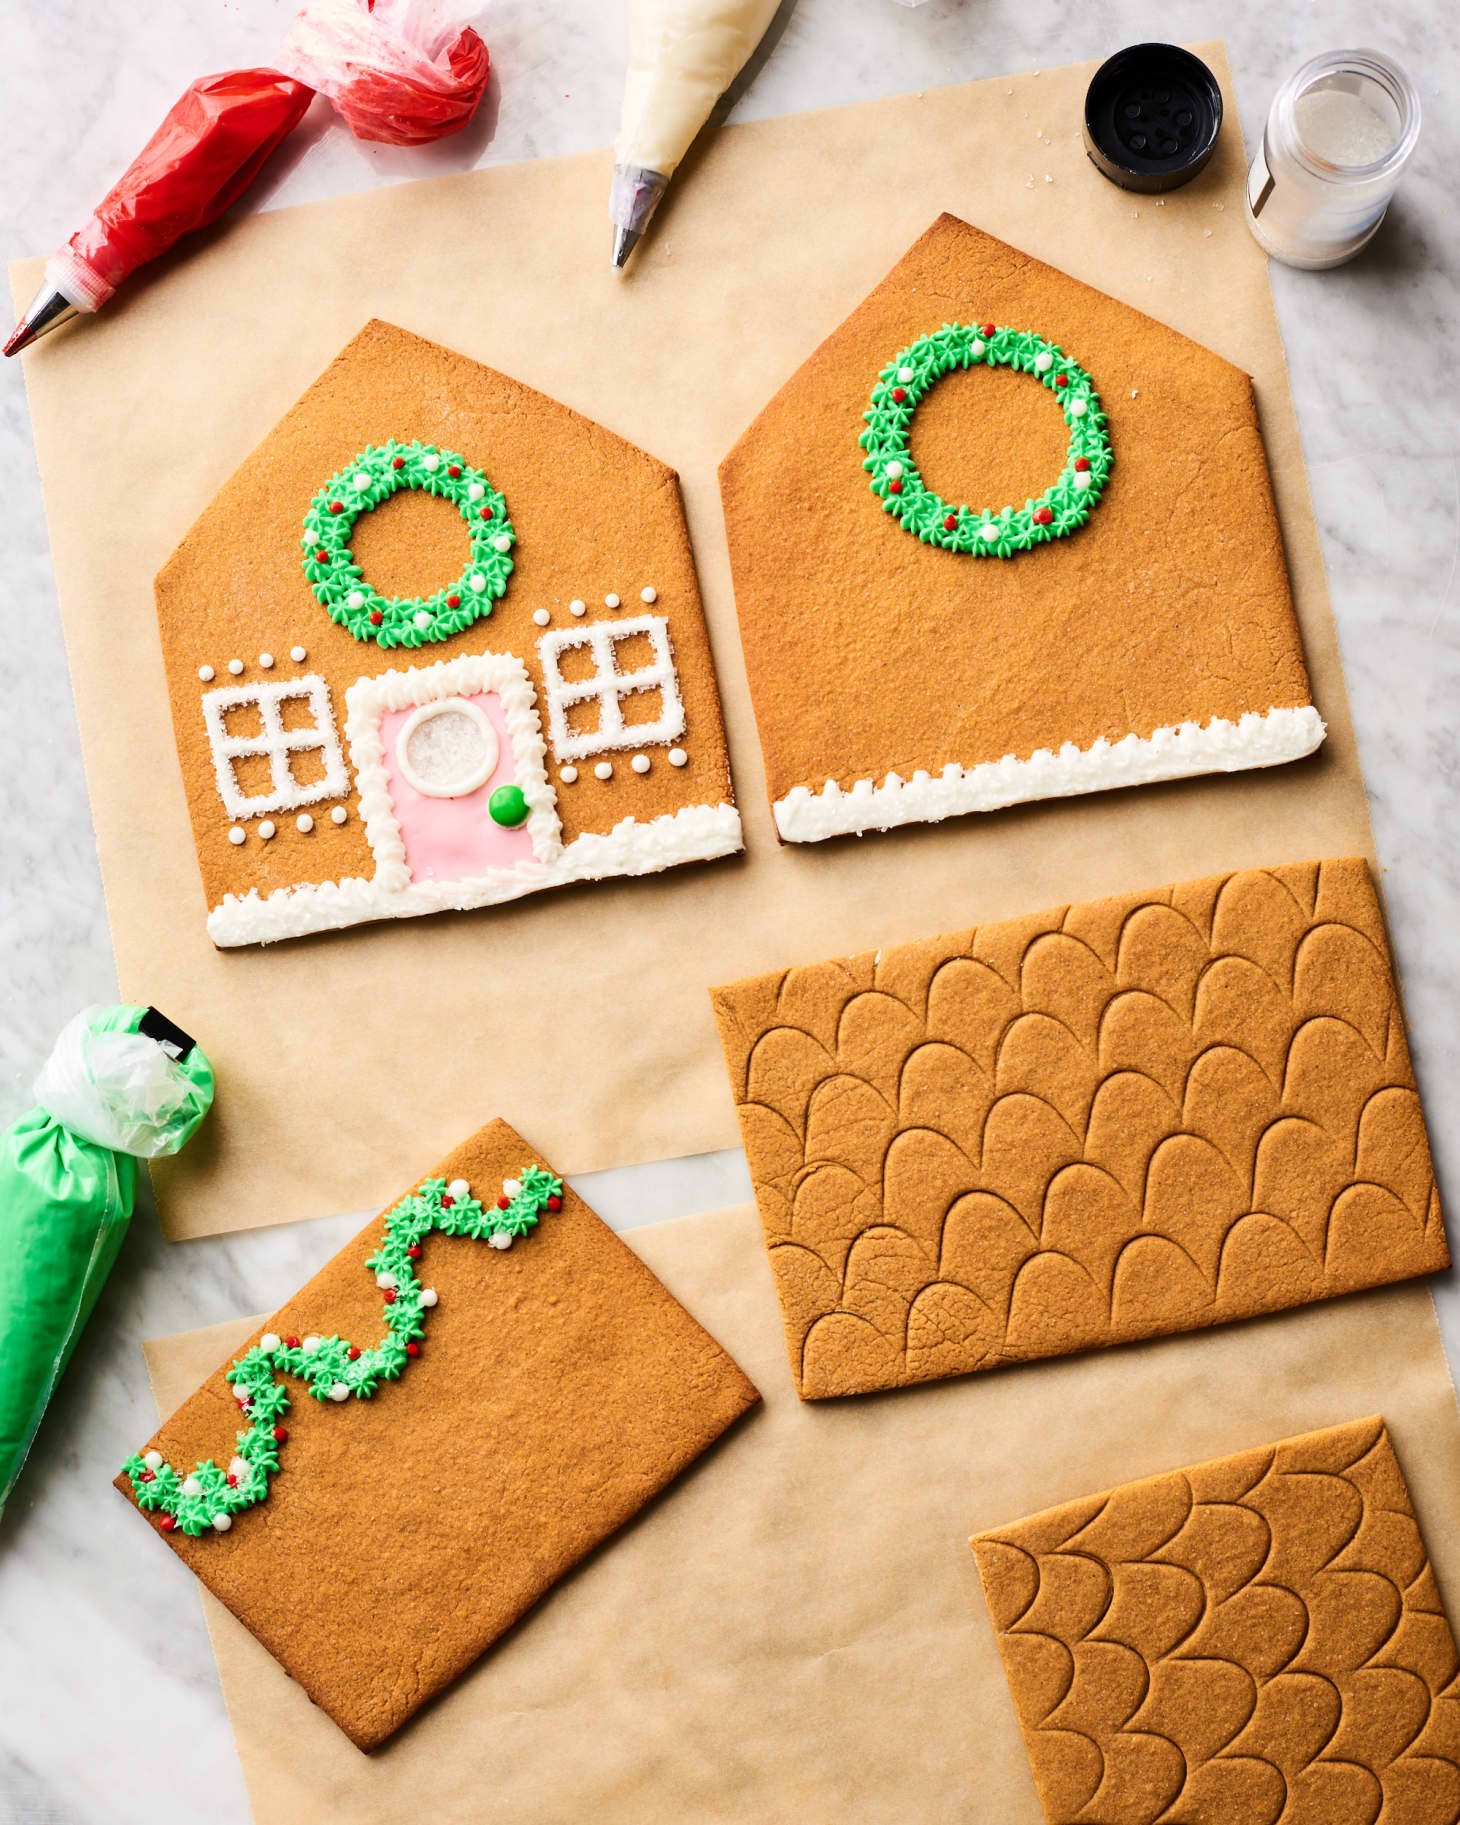 How to Make an Easy (But Still Impressive!) Gingerbread House | Kitchn